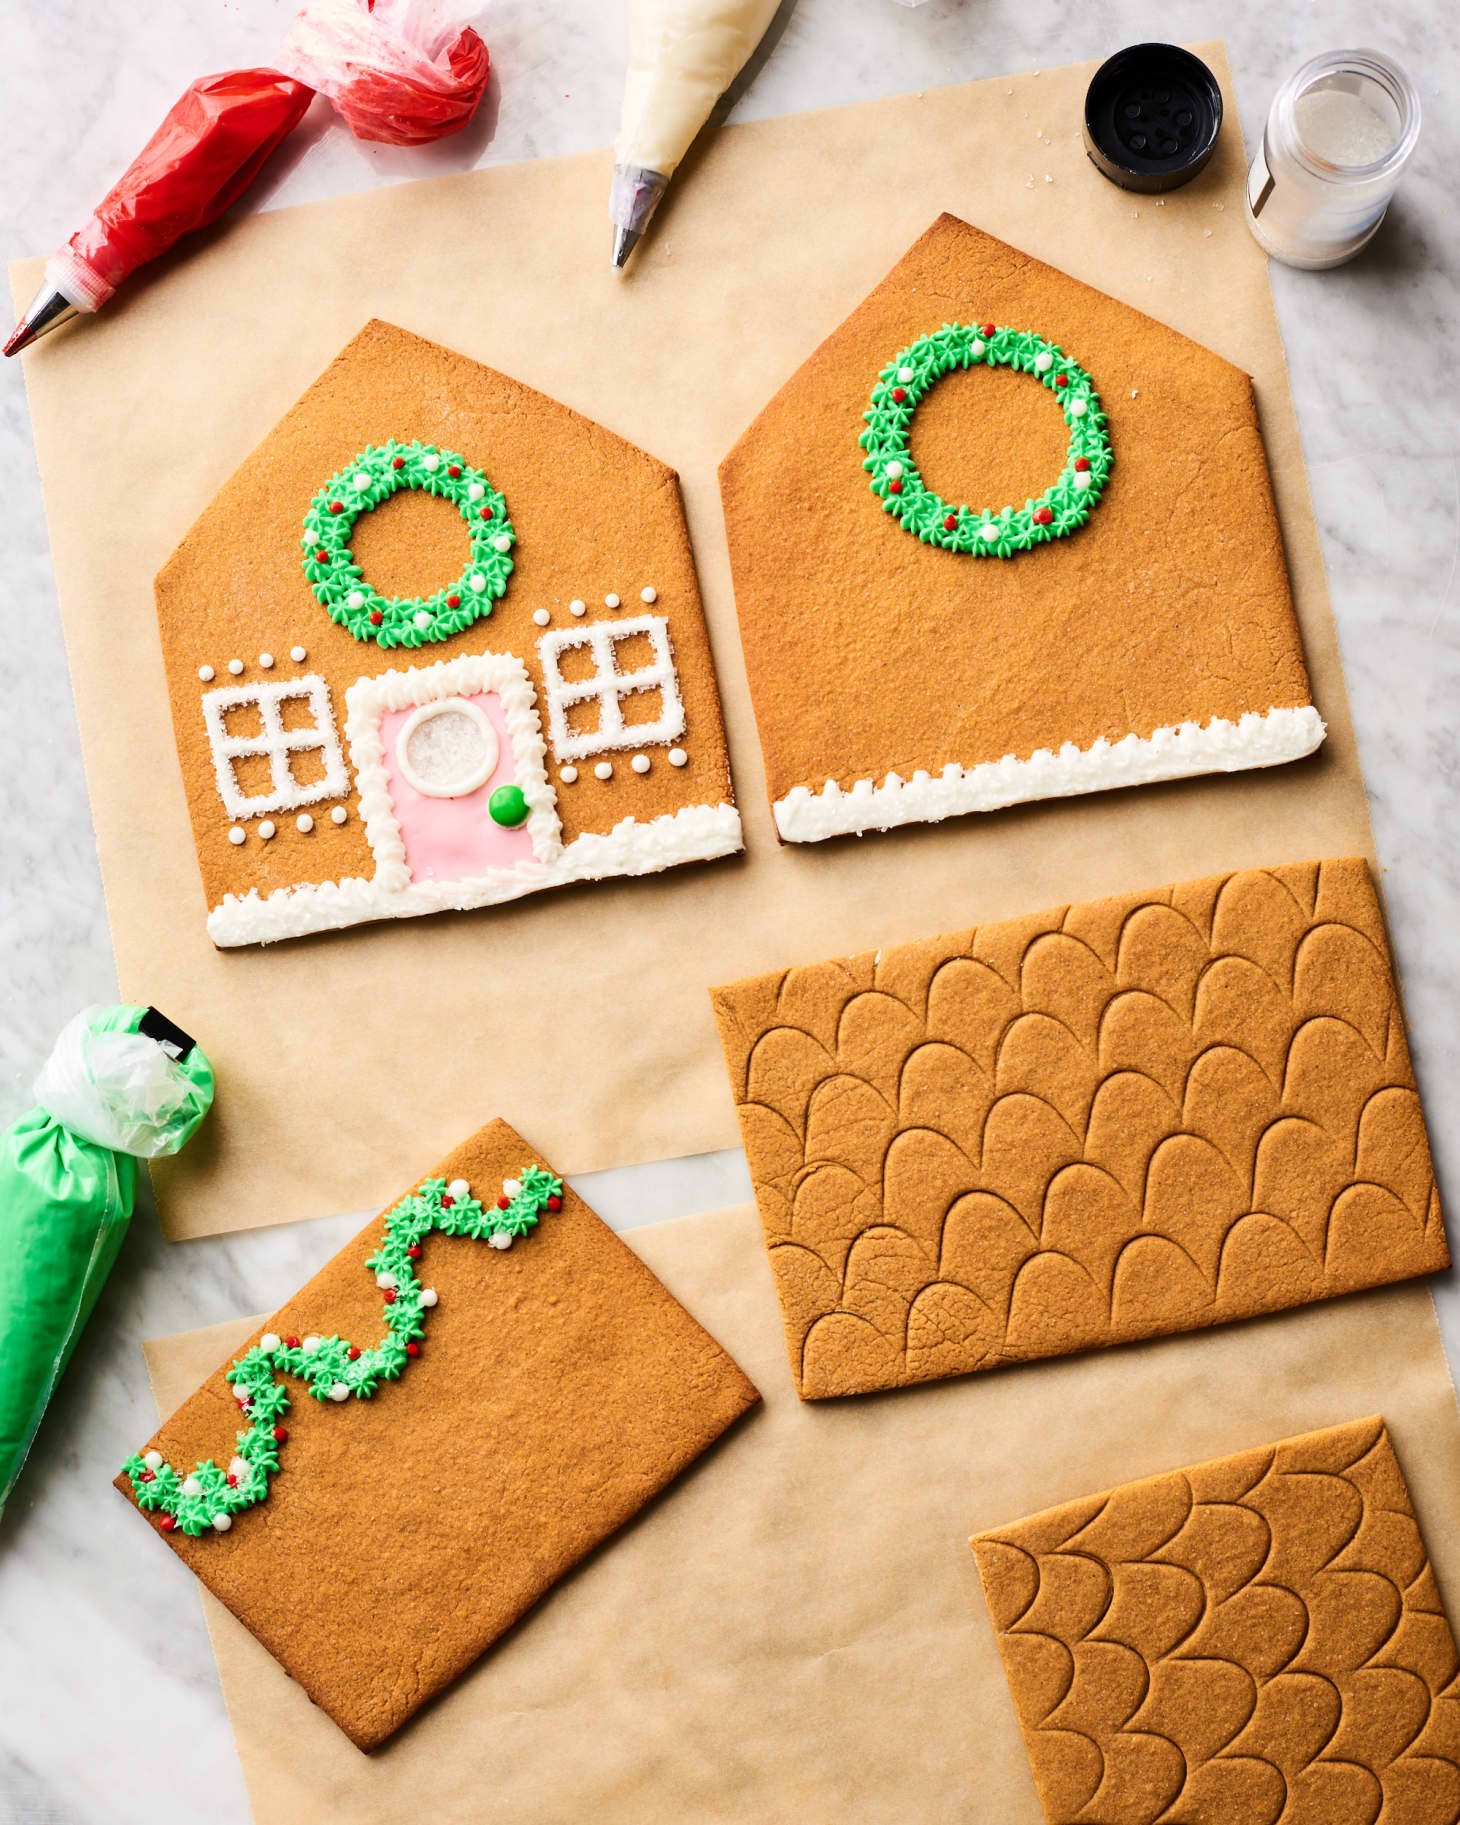 How to Make an Easy (But Still Impressive!) Gingerbread House | Kitchn